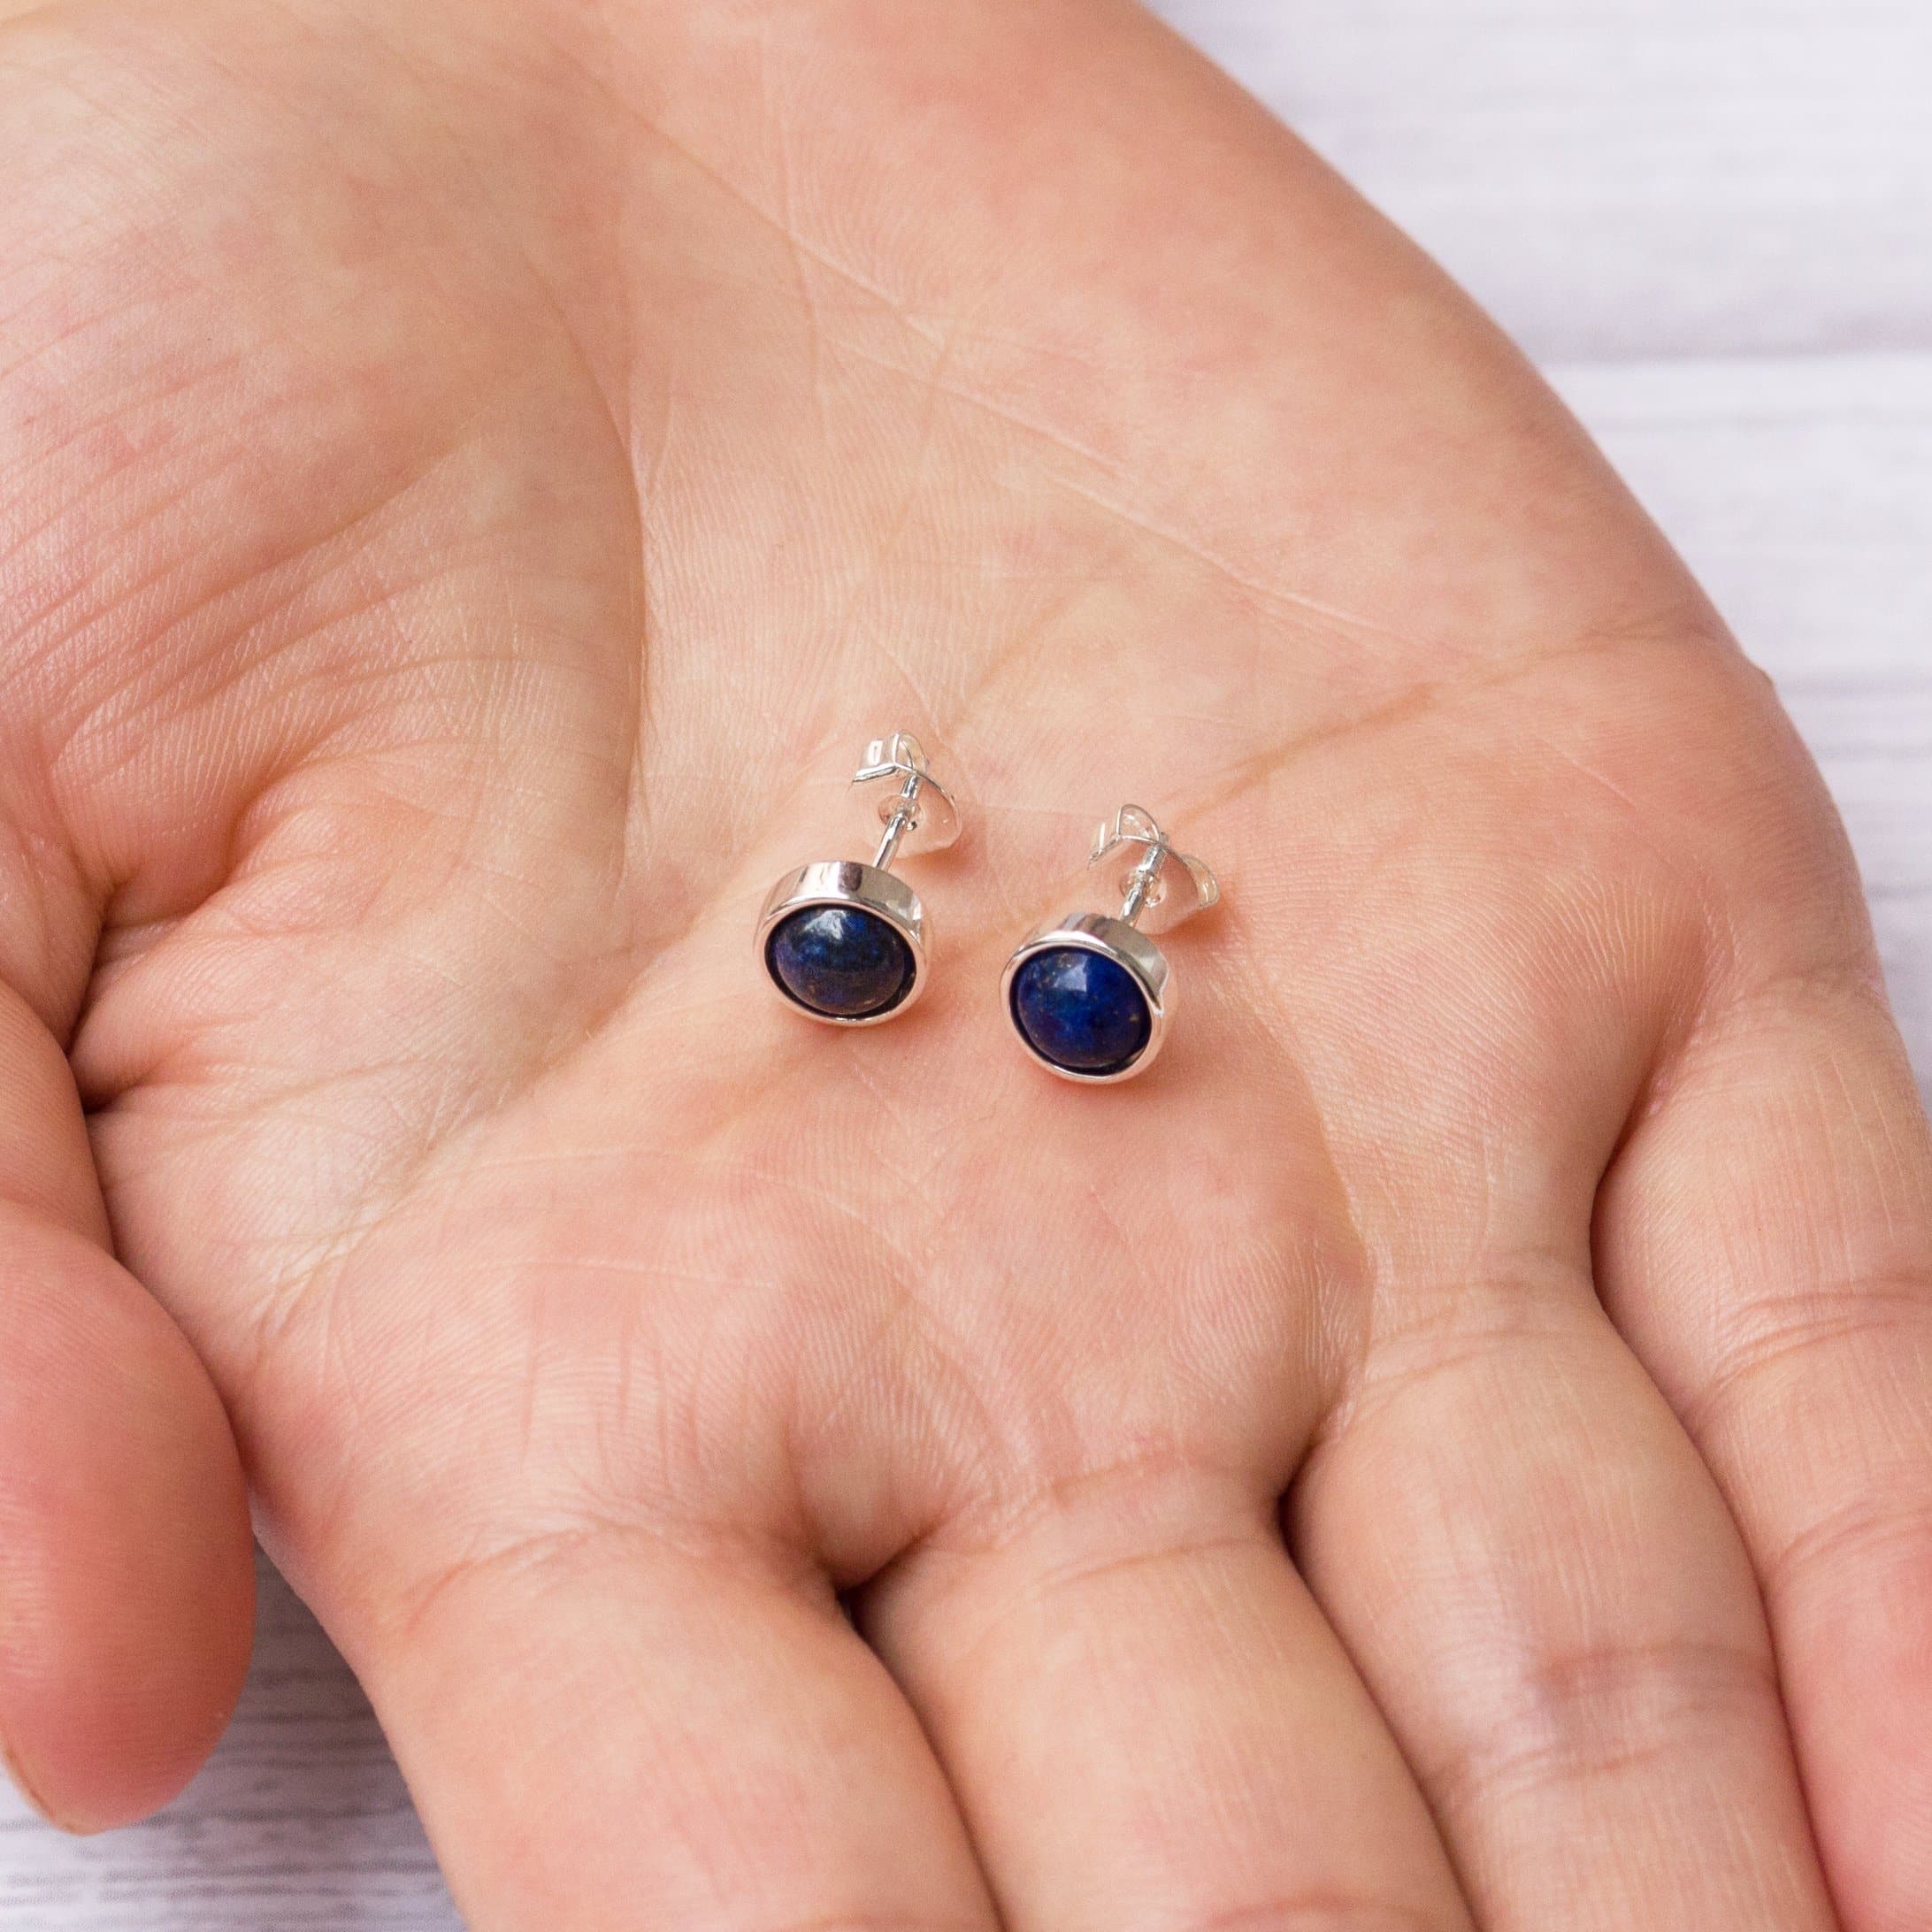 Lapis Stud Earrings with Quote Card